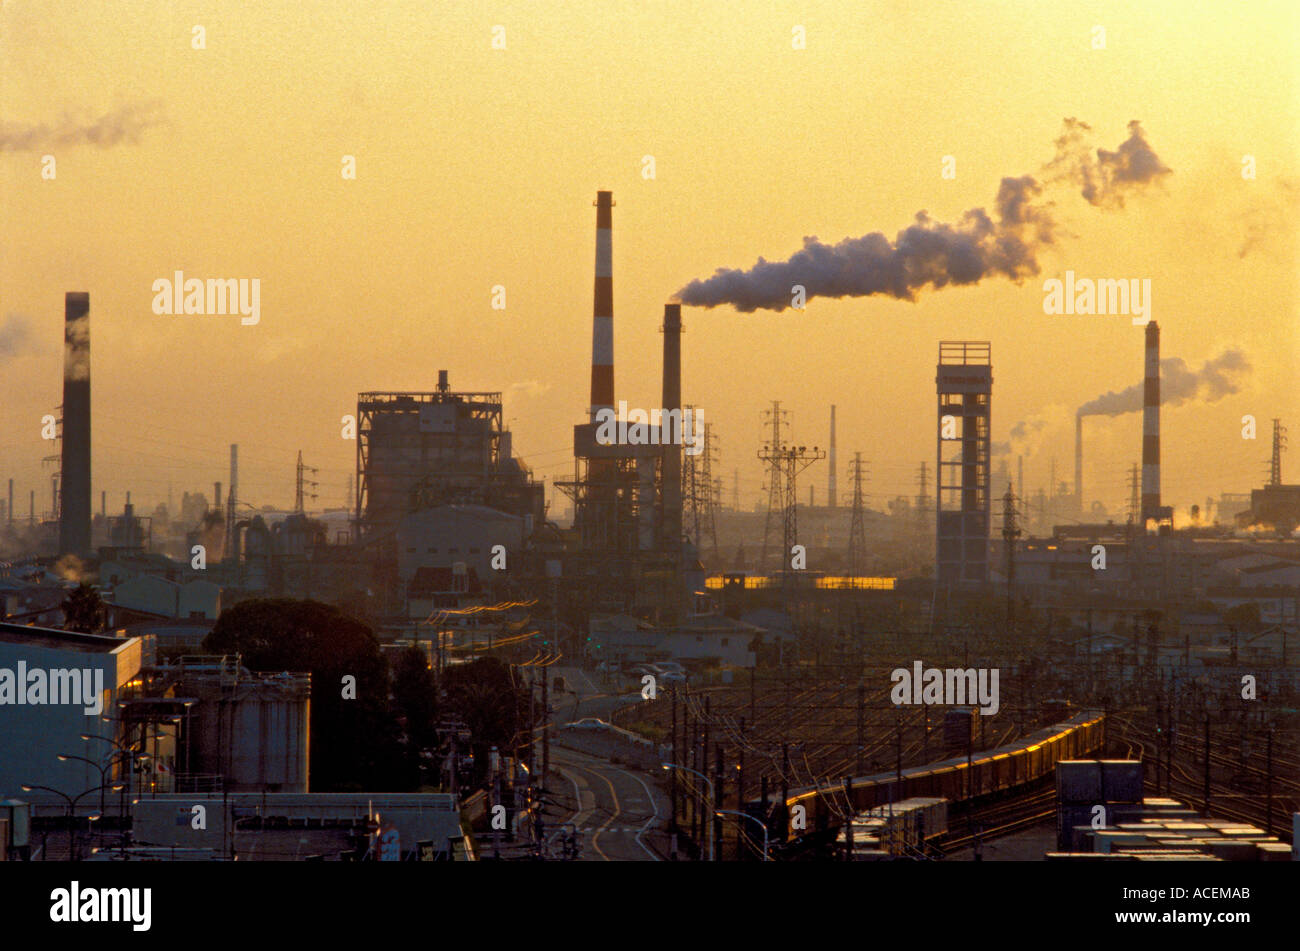 Smoke billows from factory chimneys at sunset in the Fuji City area of Shizuoka Prefecture, Japan's industrial complex Stock Photo